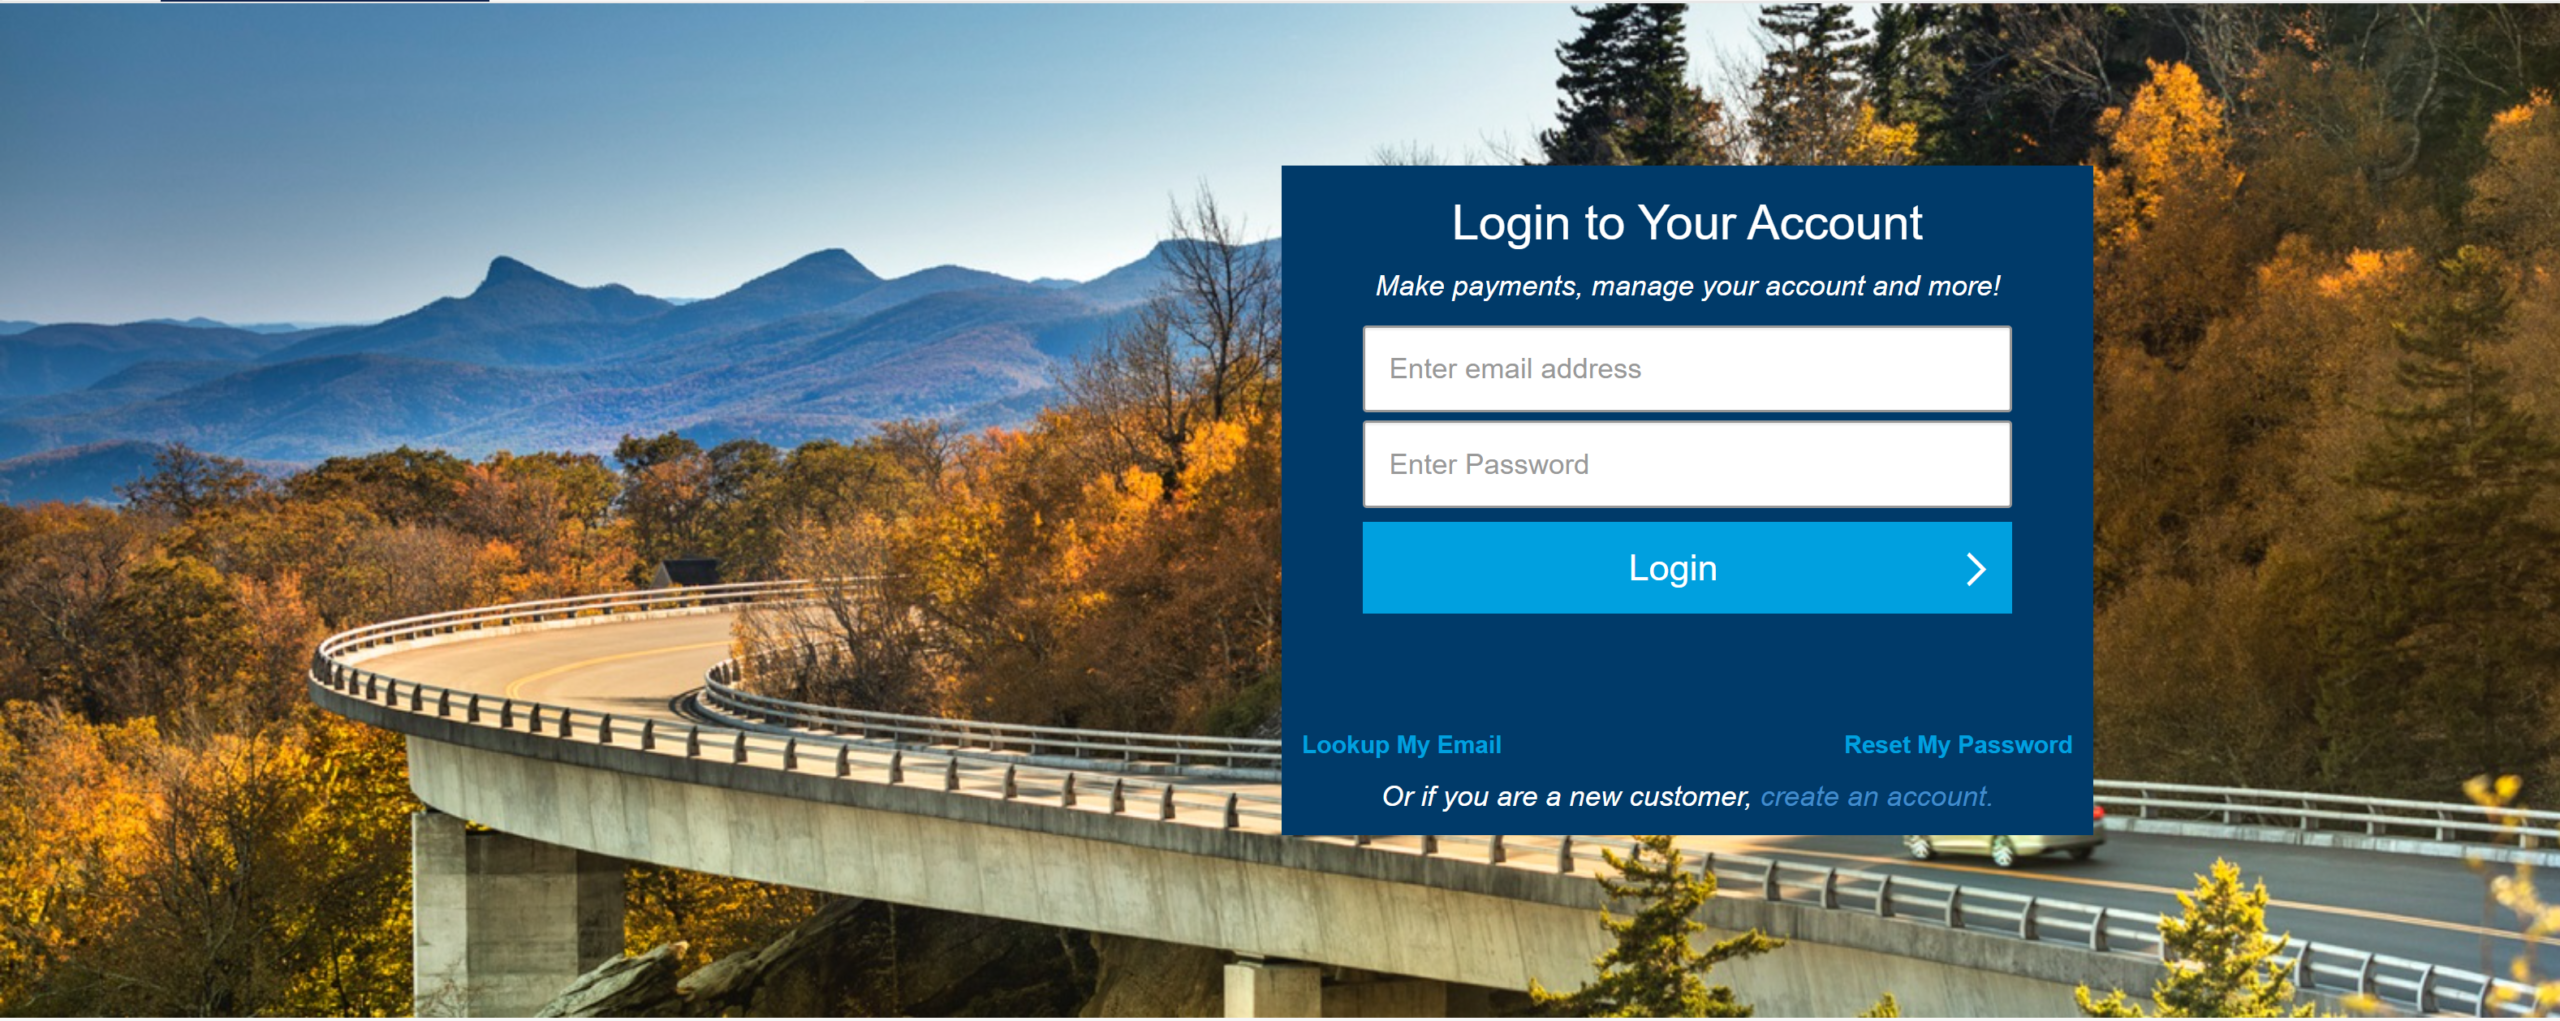 Bridgecrest Drive Time - Access Loan Account And Make Online Payments